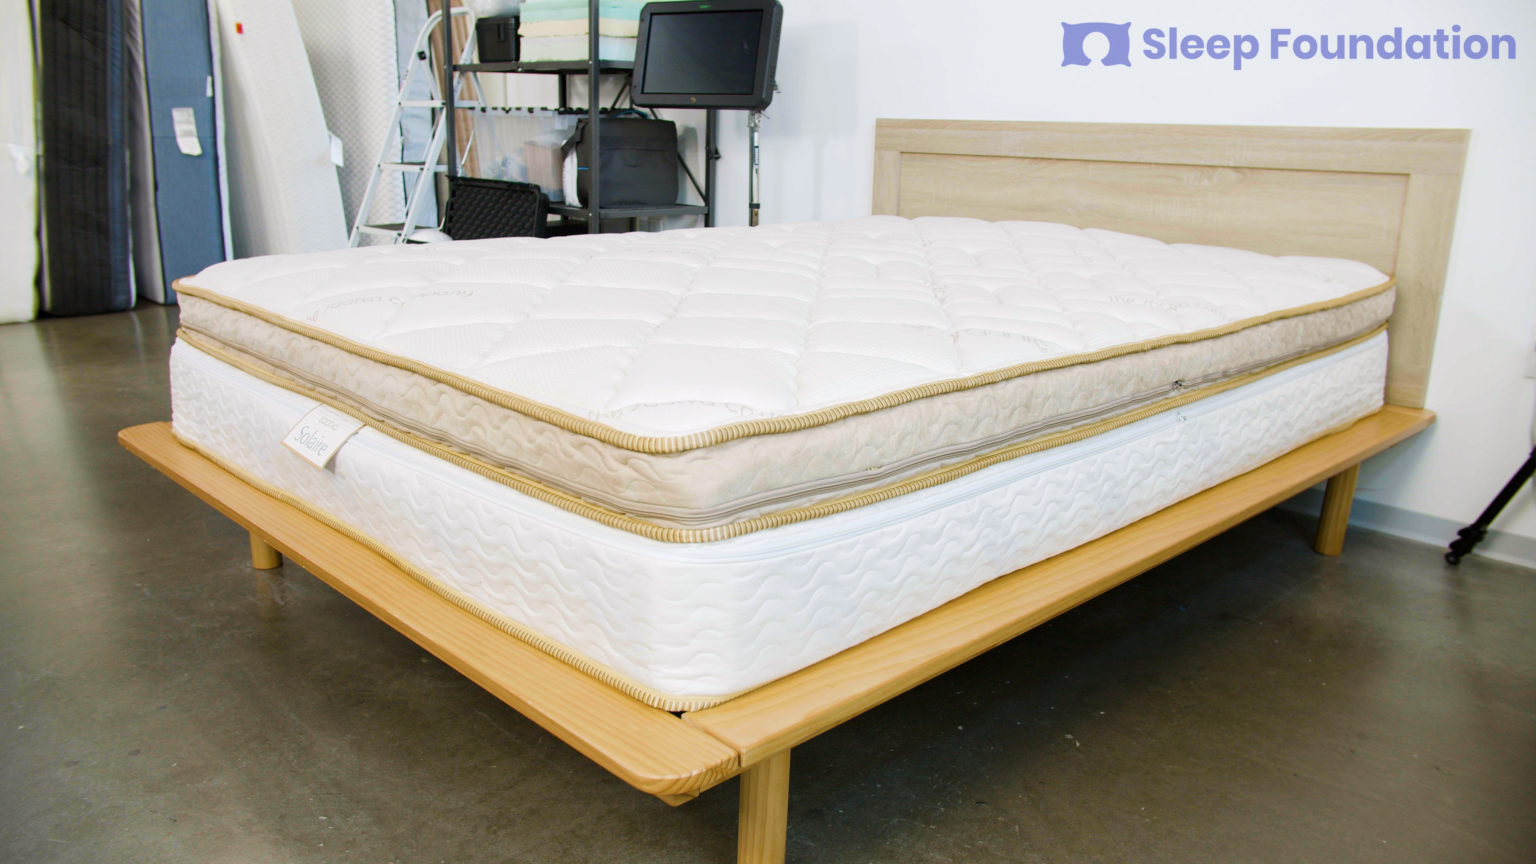 A picture of the Saatva Solaire Mattress in Sleep Foundation's test lab.